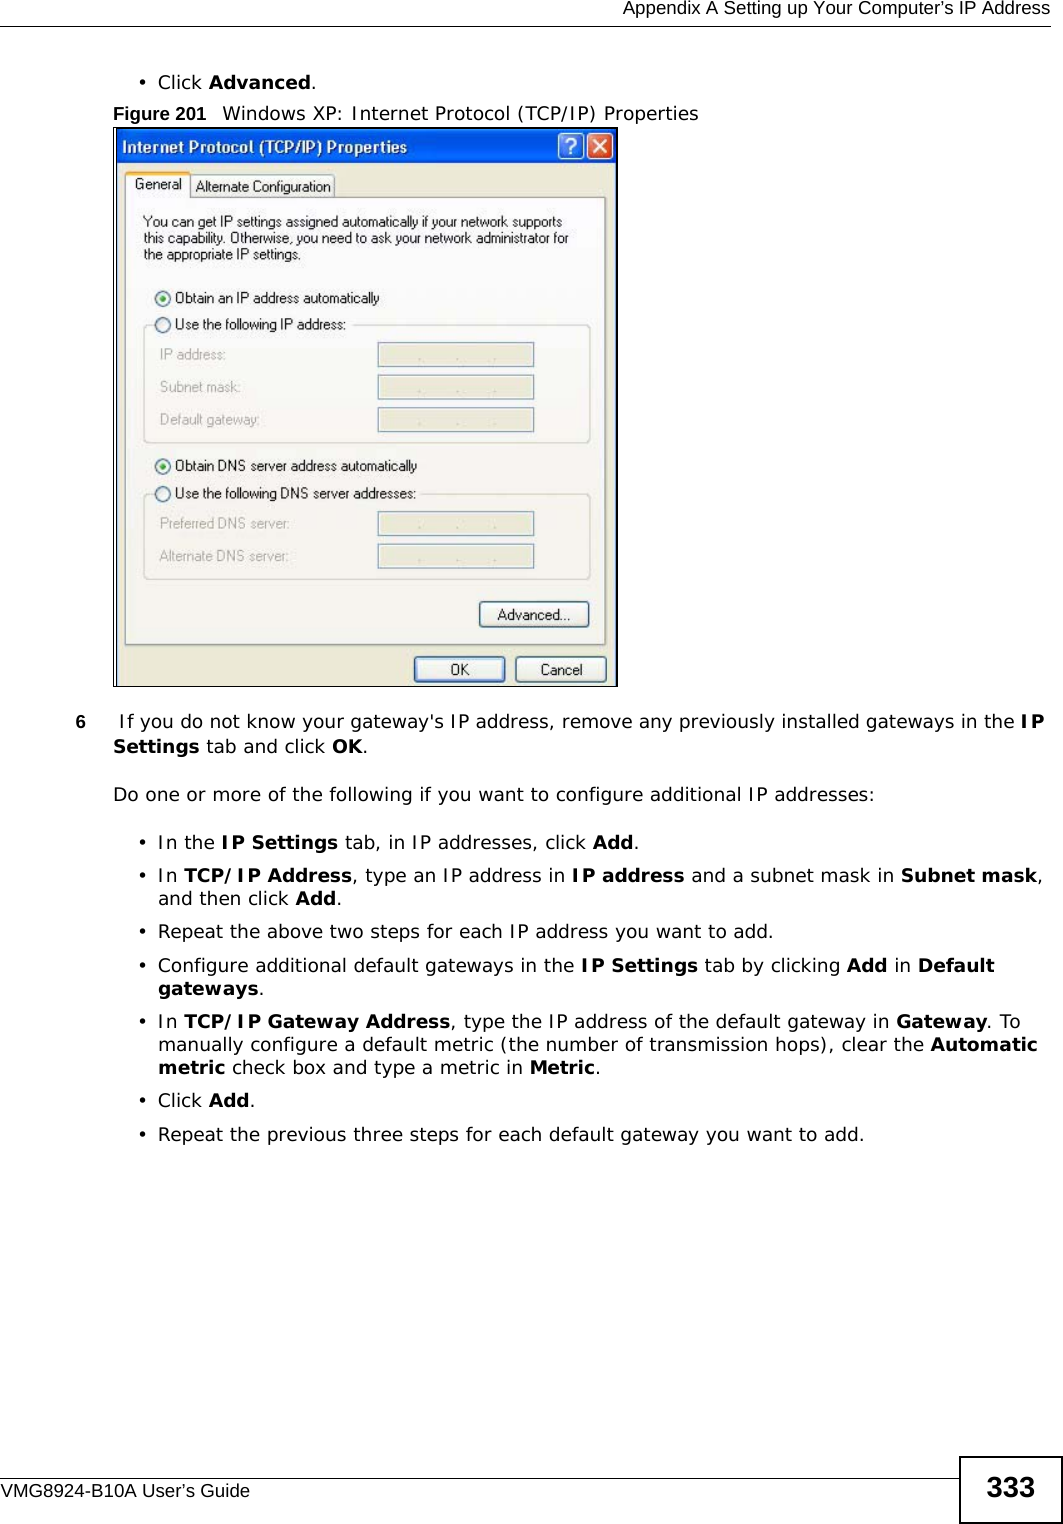  Appendix A Setting up Your Computer’s IP AddressVMG8924-B10A User’s Guide 333• Click Advanced.Figure 201   Windows XP: Internet Protocol (TCP/IP) Properties6 If you do not know your gateway&apos;s IP address, remove any previously installed gateways in the IP Settings tab and click OK.Do one or more of the following if you want to configure additional IP addresses:•In the IP Settings tab, in IP addresses, click Add.•In TCP/IP Address, type an IP address in IP address and a subnet mask in Subnet mask, and then click Add.• Repeat the above two steps for each IP address you want to add.• Configure additional default gateways in the IP Settings tab by clicking Add in Default gateways.•In TCP/IP Gateway Address, type the IP address of the default gateway in Gateway. To manually configure a default metric (the number of transmission hops), clear the Automatic metric check box and type a metric in Metric.• Click Add. • Repeat the previous three steps for each default gateway you want to add.